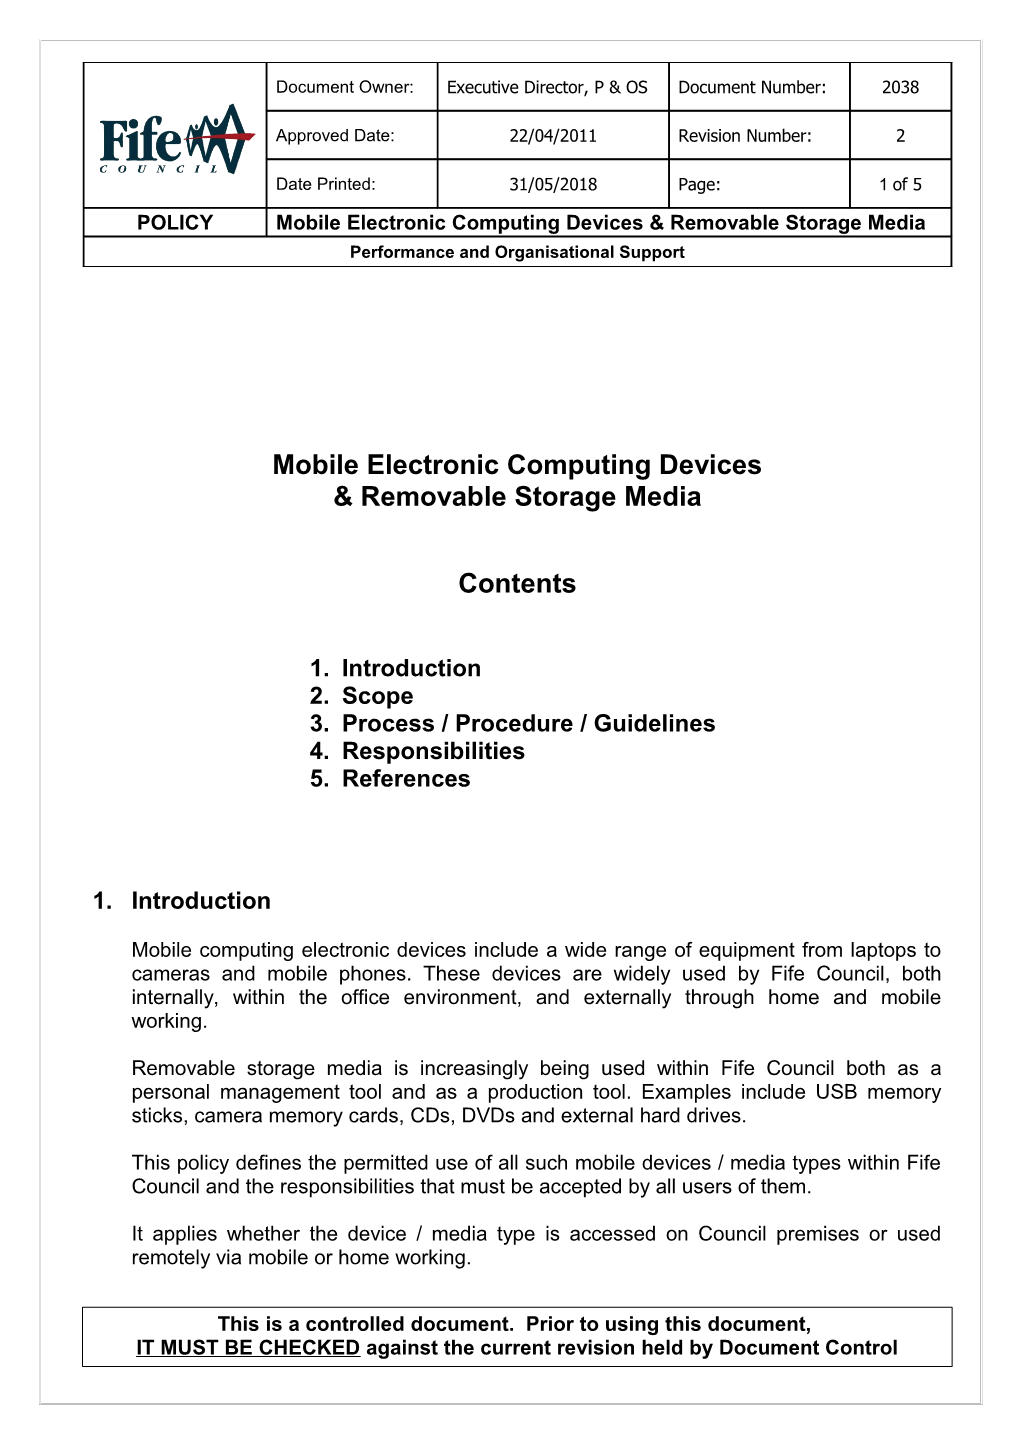 Mobile Electronic Computing Devices